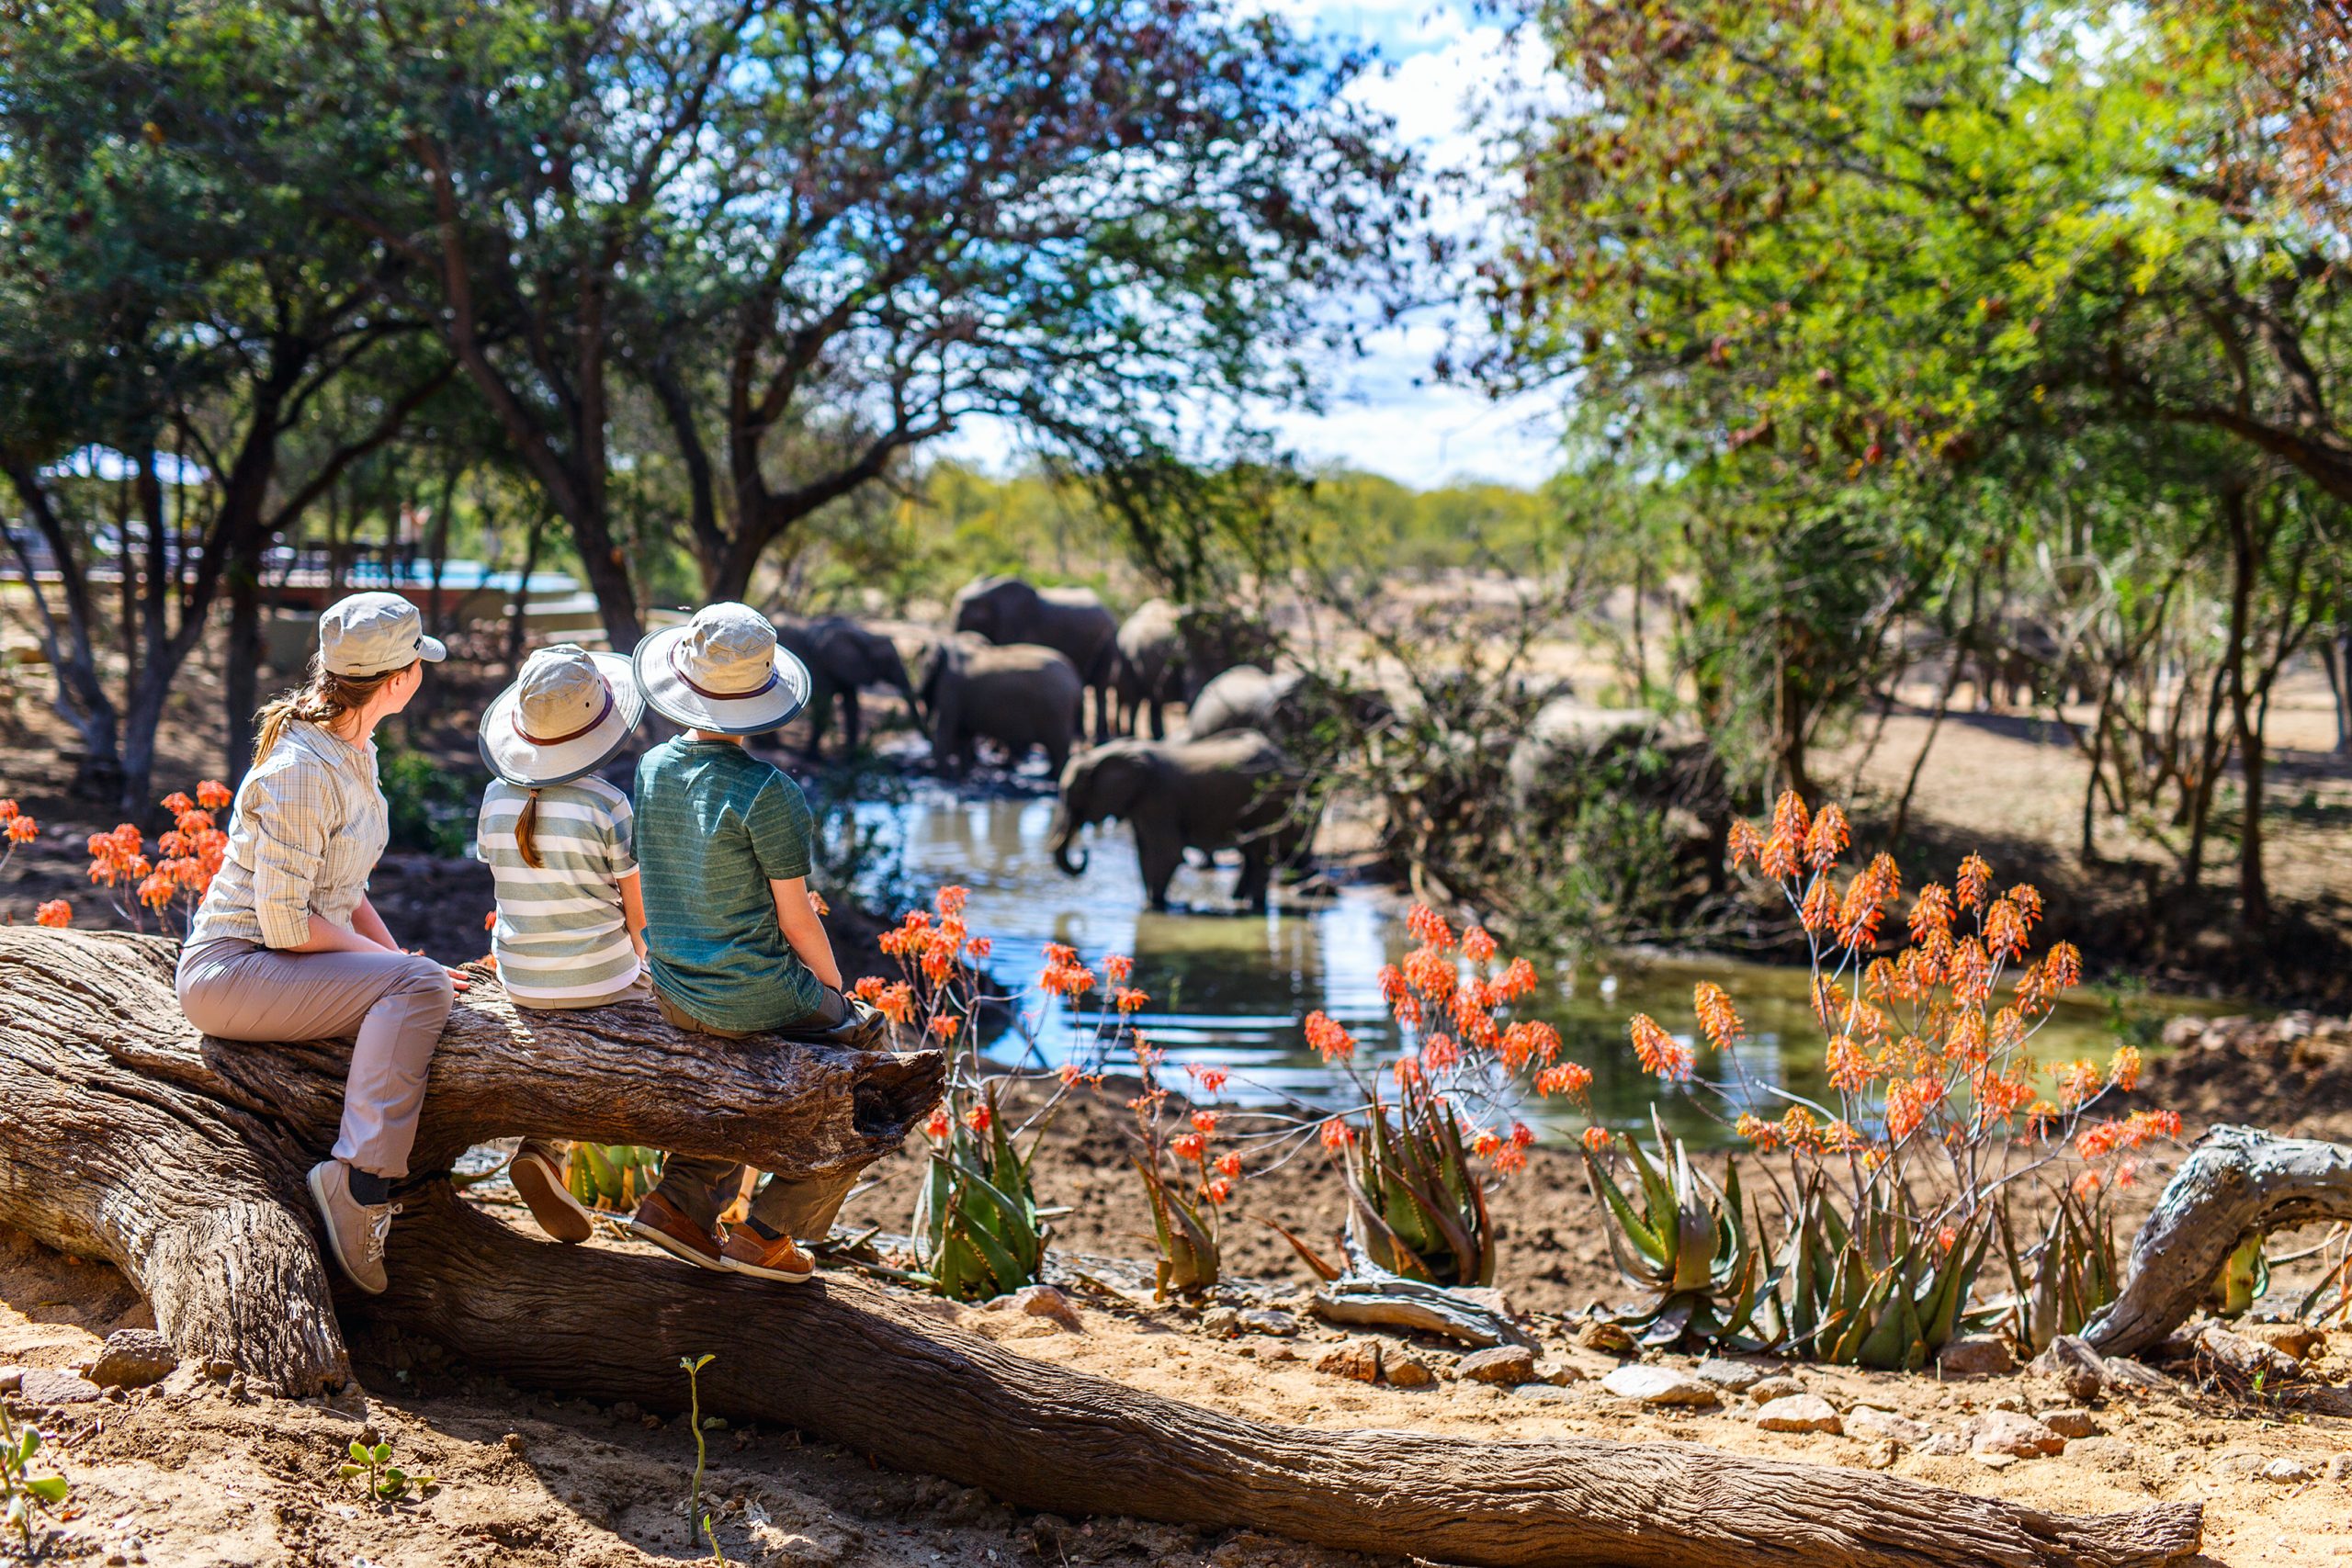 mother on a african safari trip with her son and daughter. family sits on a fallen tree trunk and gazes at the family of elephants in a pool of water on a sunny day.